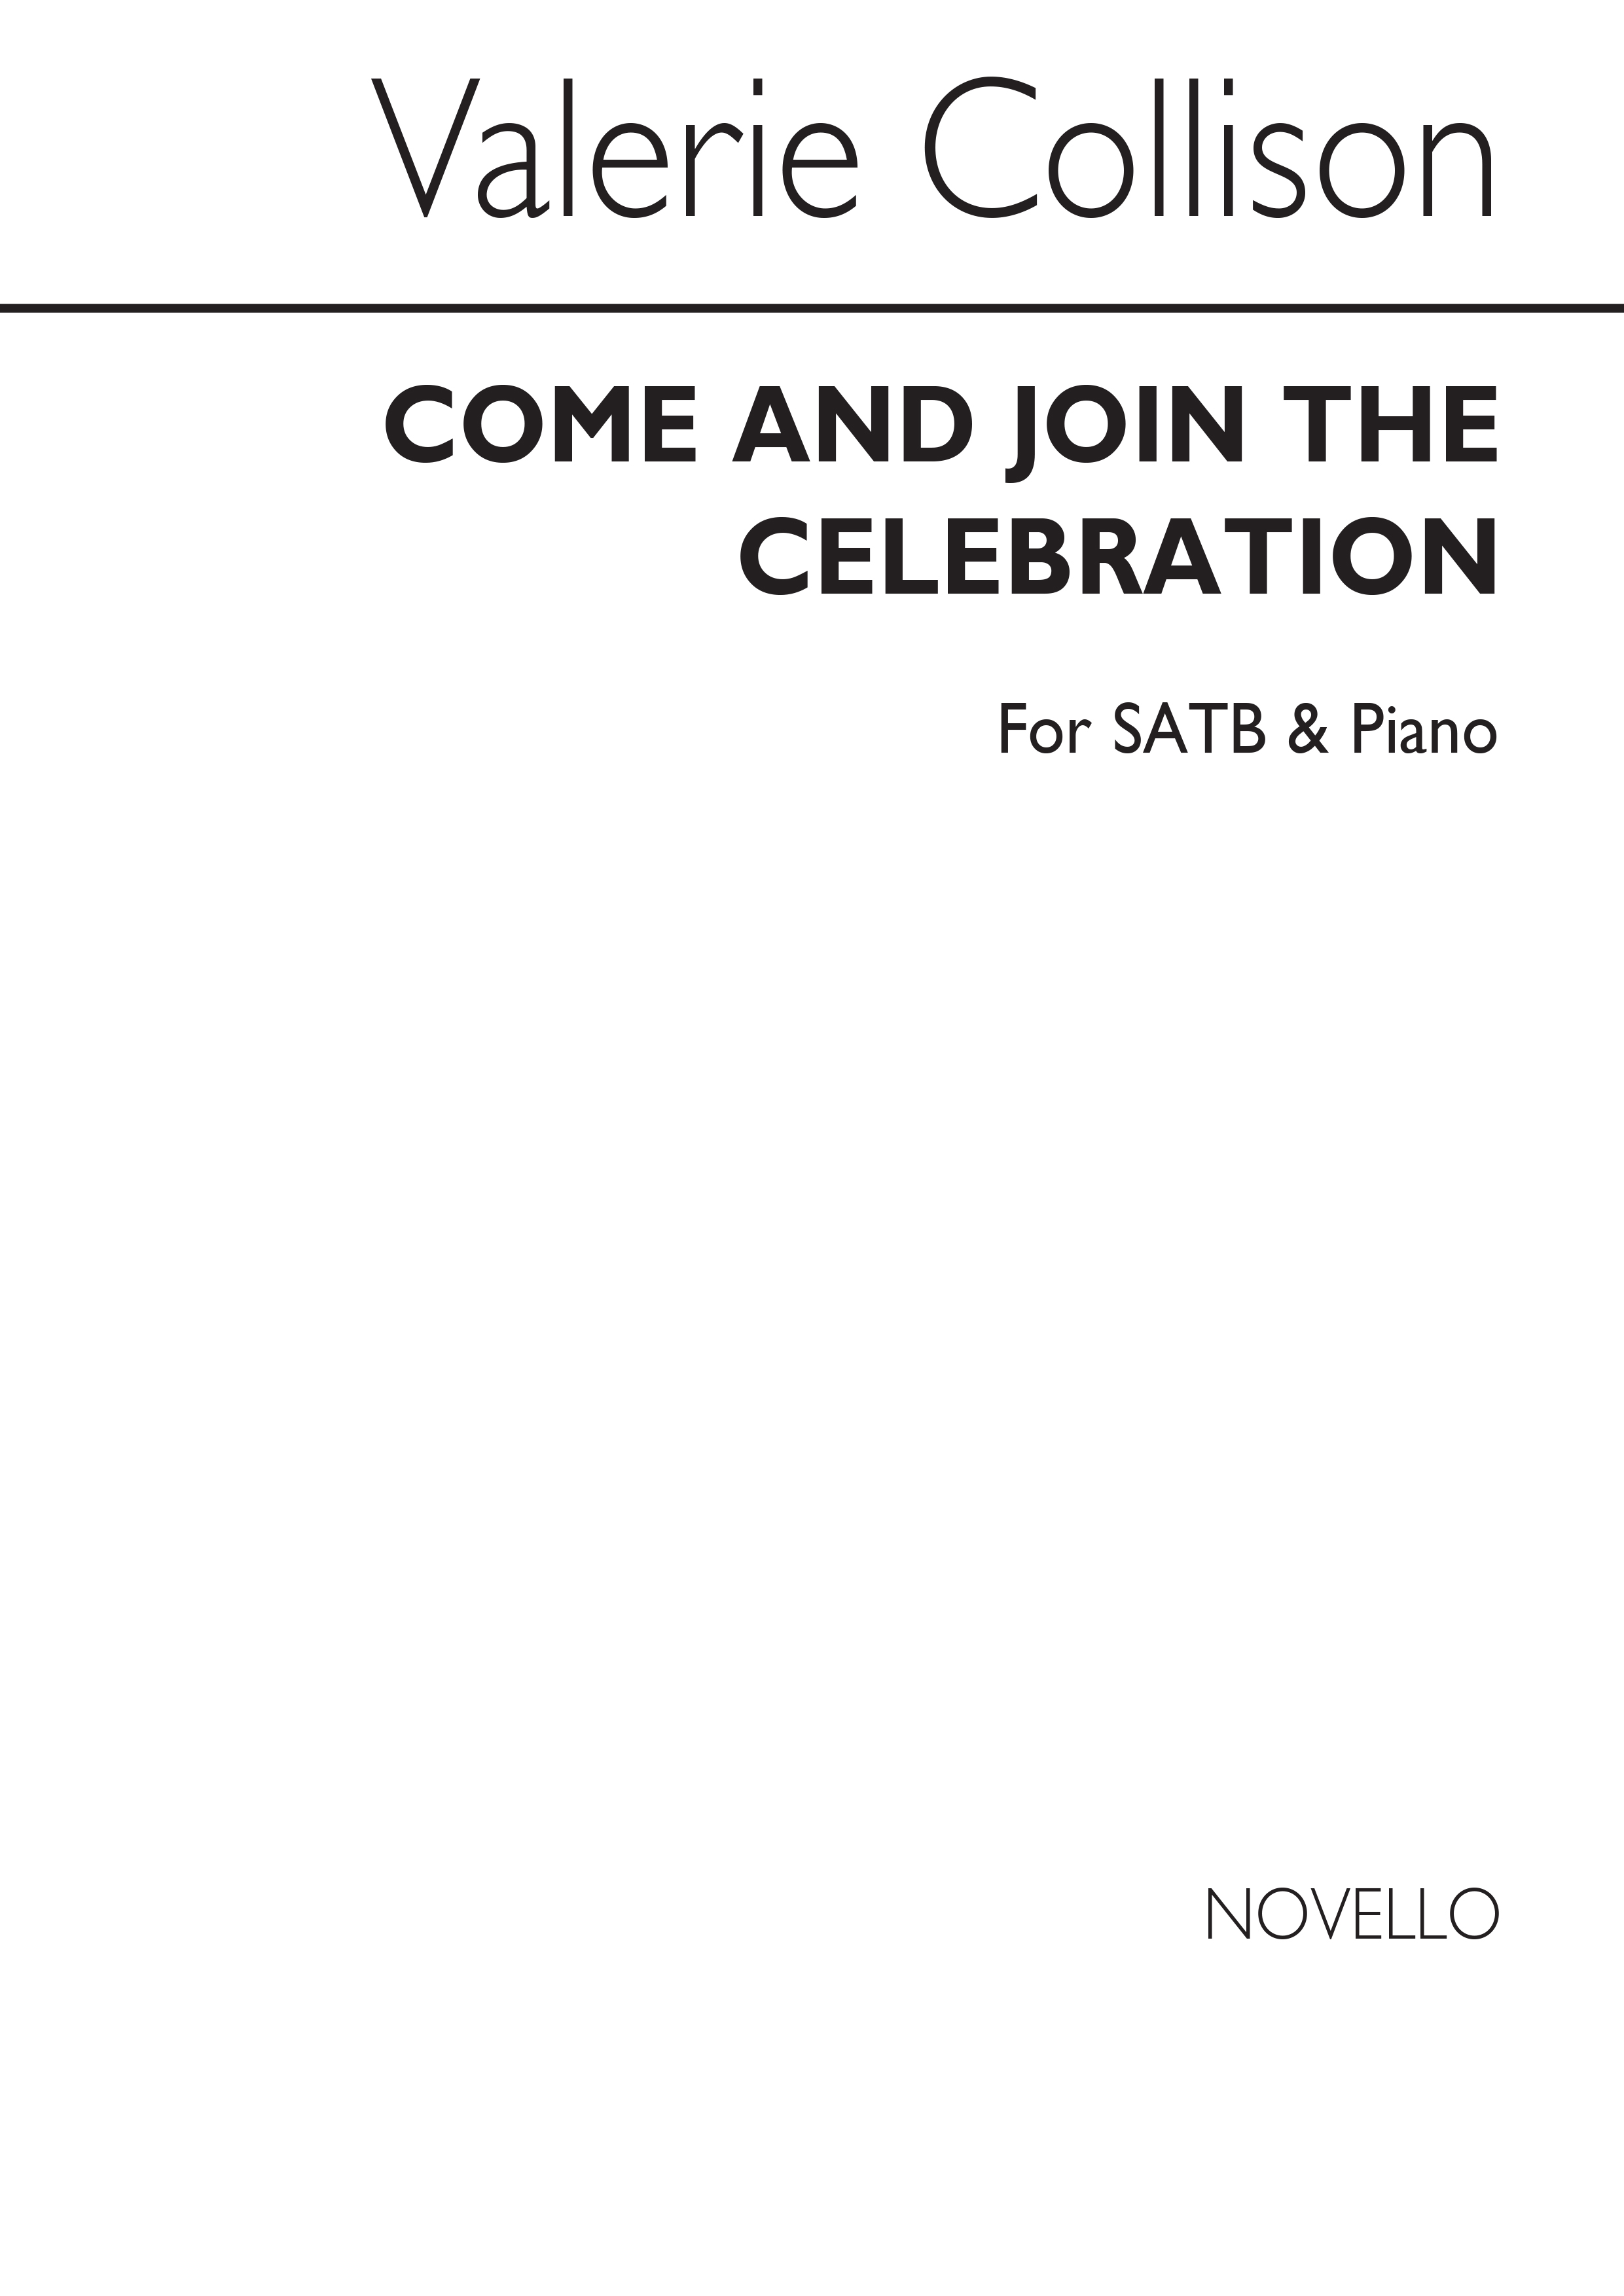 Valerie Collison: Come And Join The Celebration!